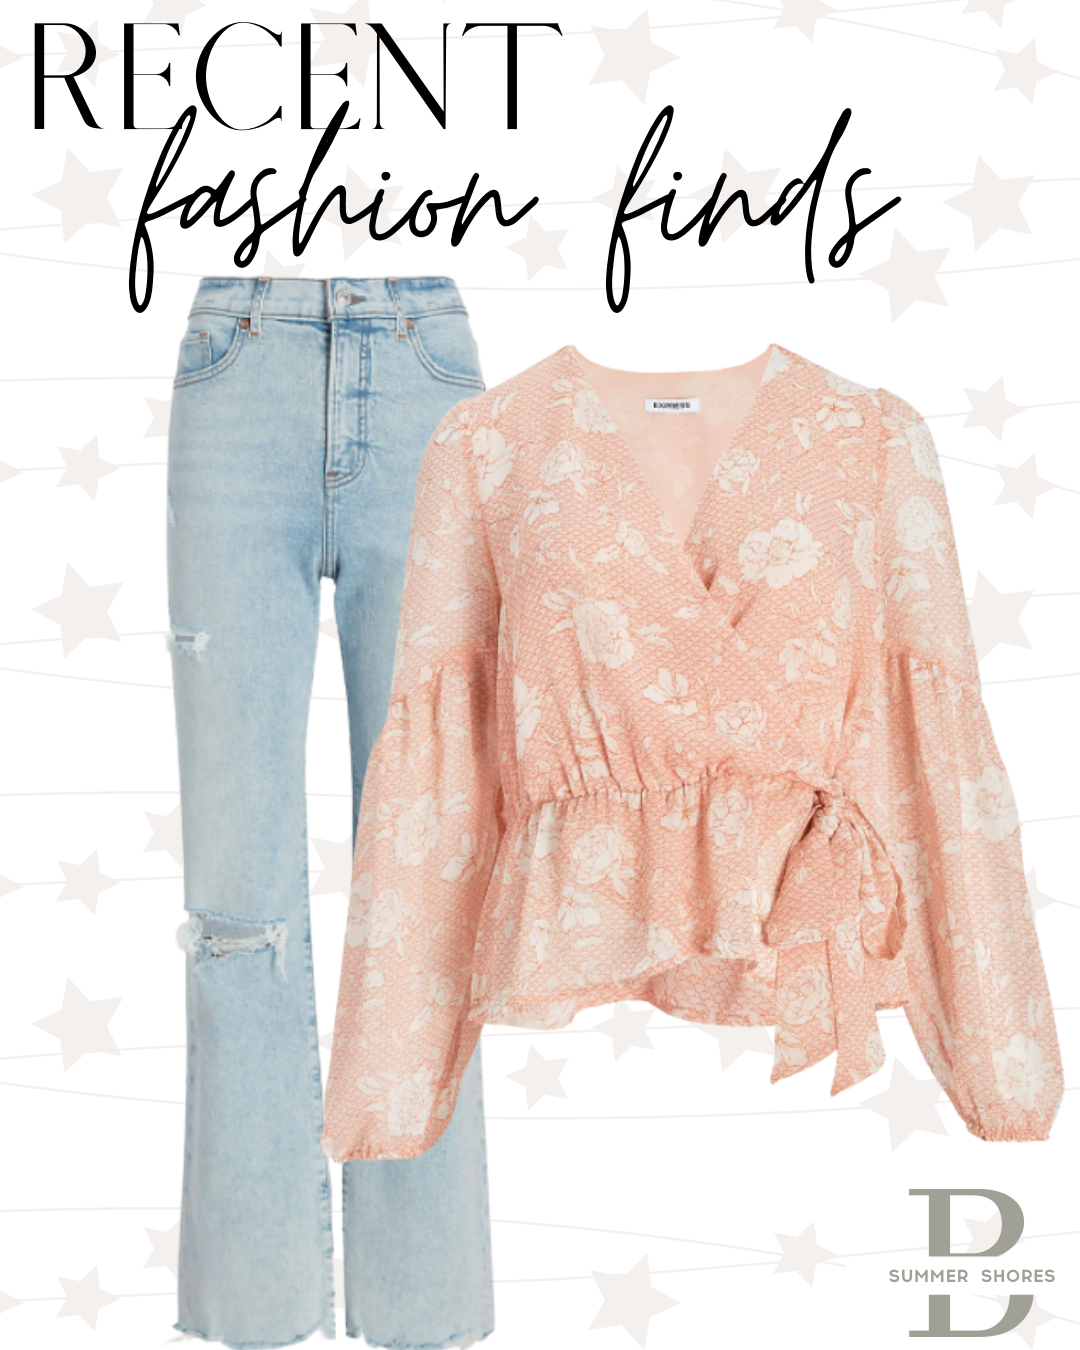 Trendy-Casual Office Fashion Finds - Being Summer Shores